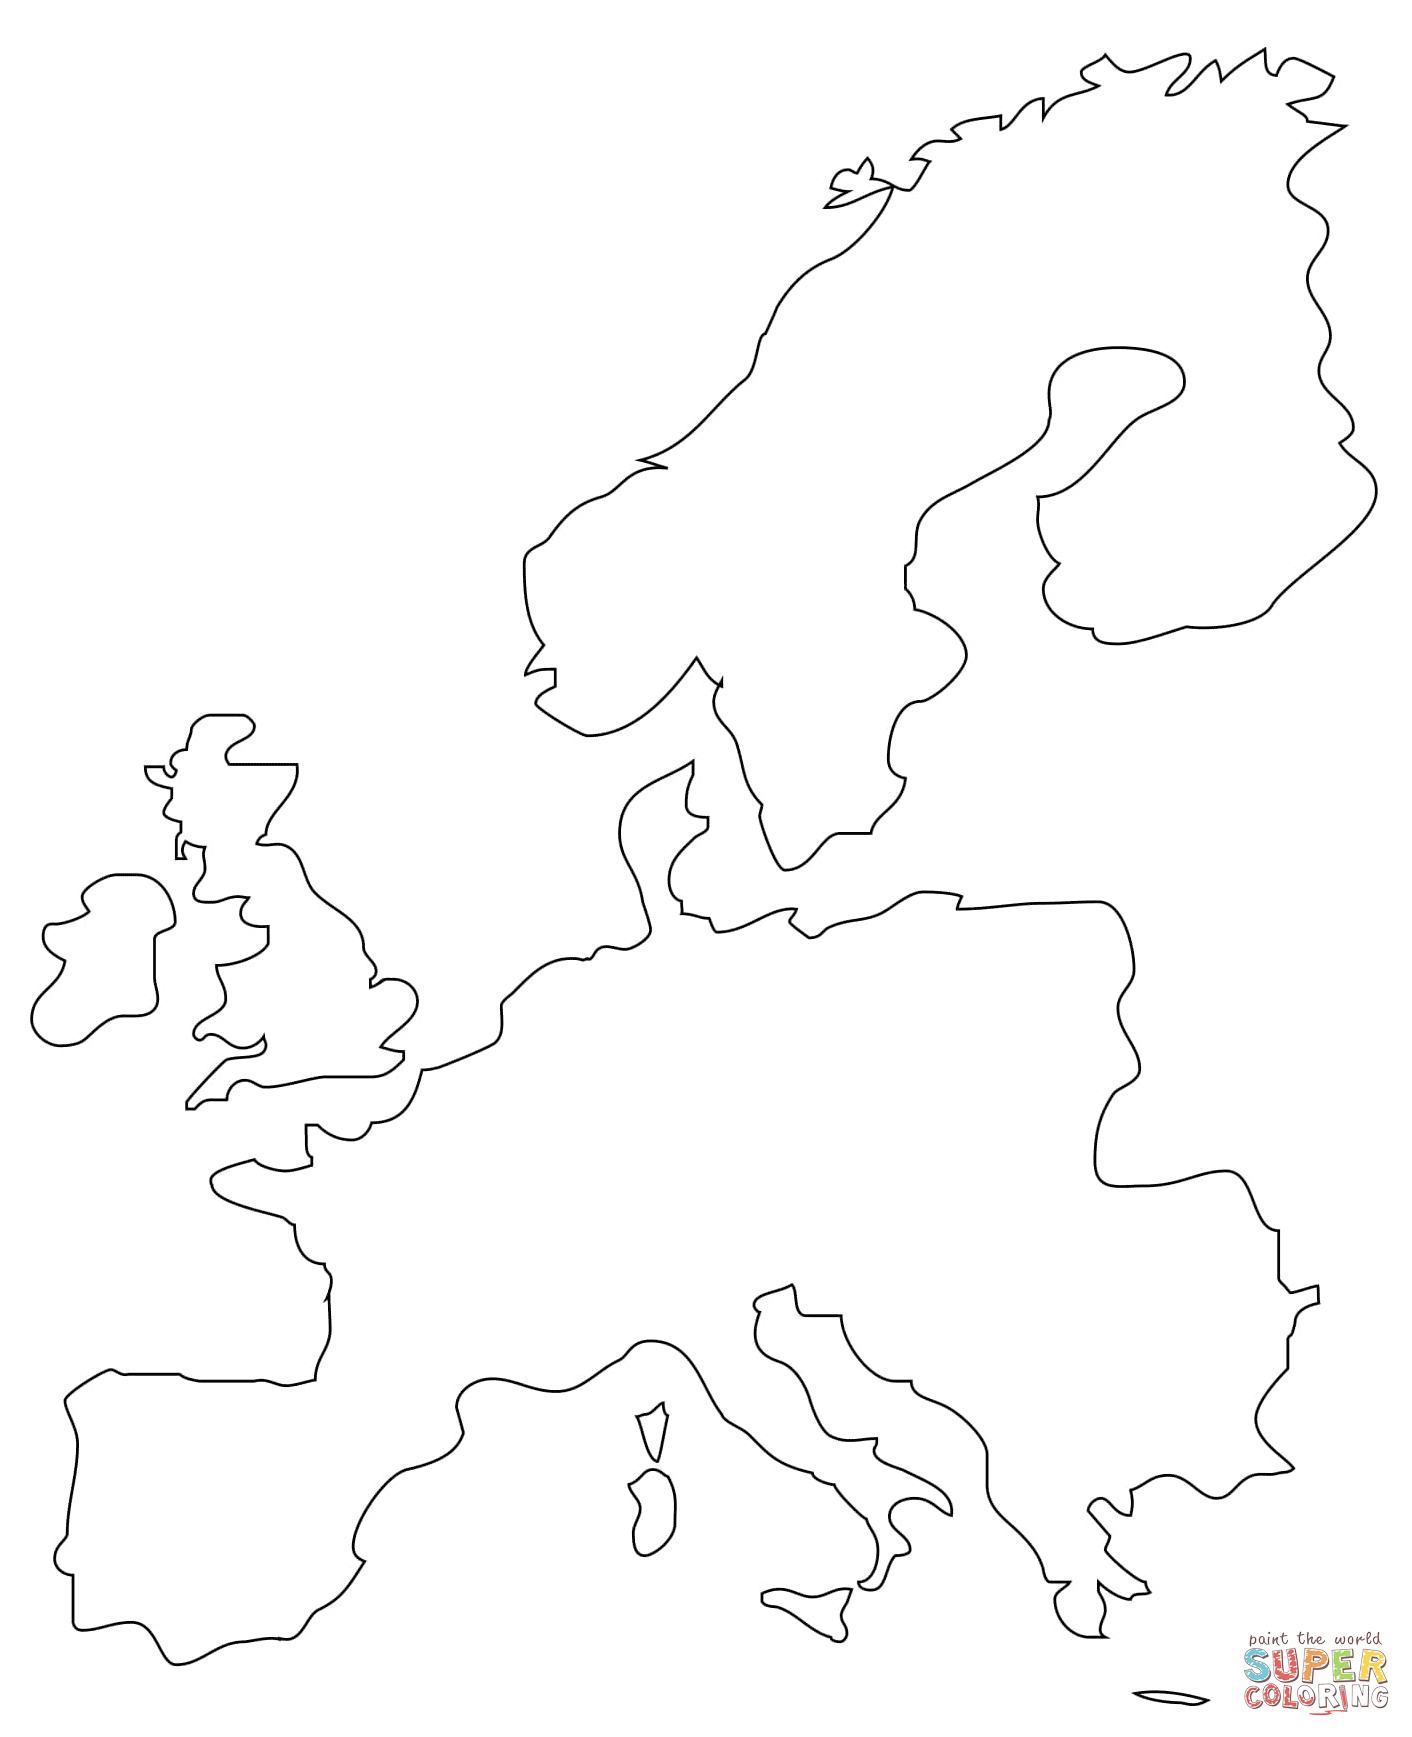 Outline map of europe coloring page free printable coloring pages